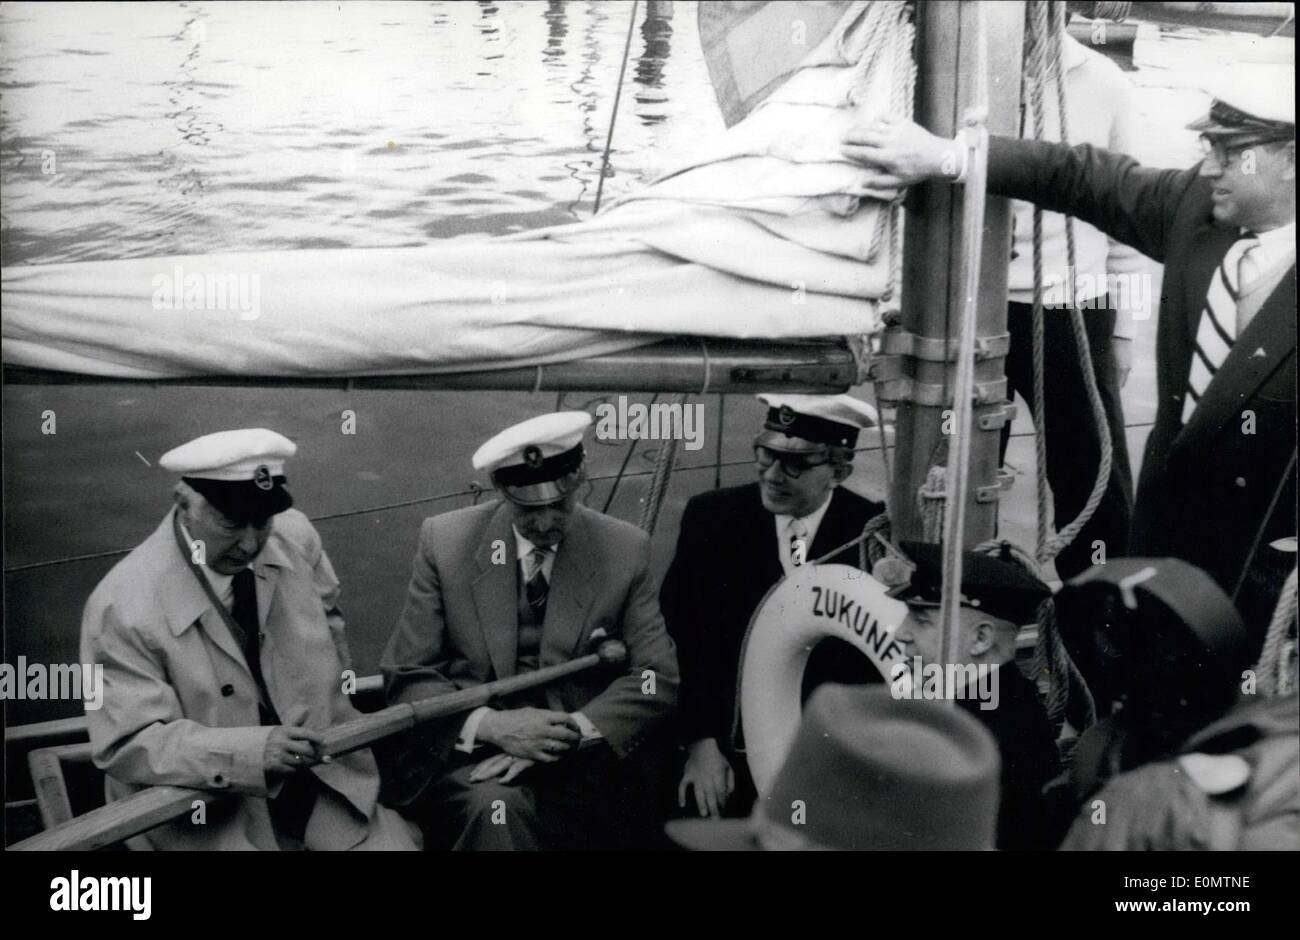 Jun. 20, 1956 - Kieler Week 1956. Federal President Prof. Heuss, a regular attendant of the Kieler Week, insists on being present on a training vessel of a sailing regatta. On board the ''Zukunft'' from left to right: Federal President Heuss, Kiels mayor Dr. Sievers, Prime Minister Hassel, and (standing) yacht club president Dr. R?del. Stock Photo